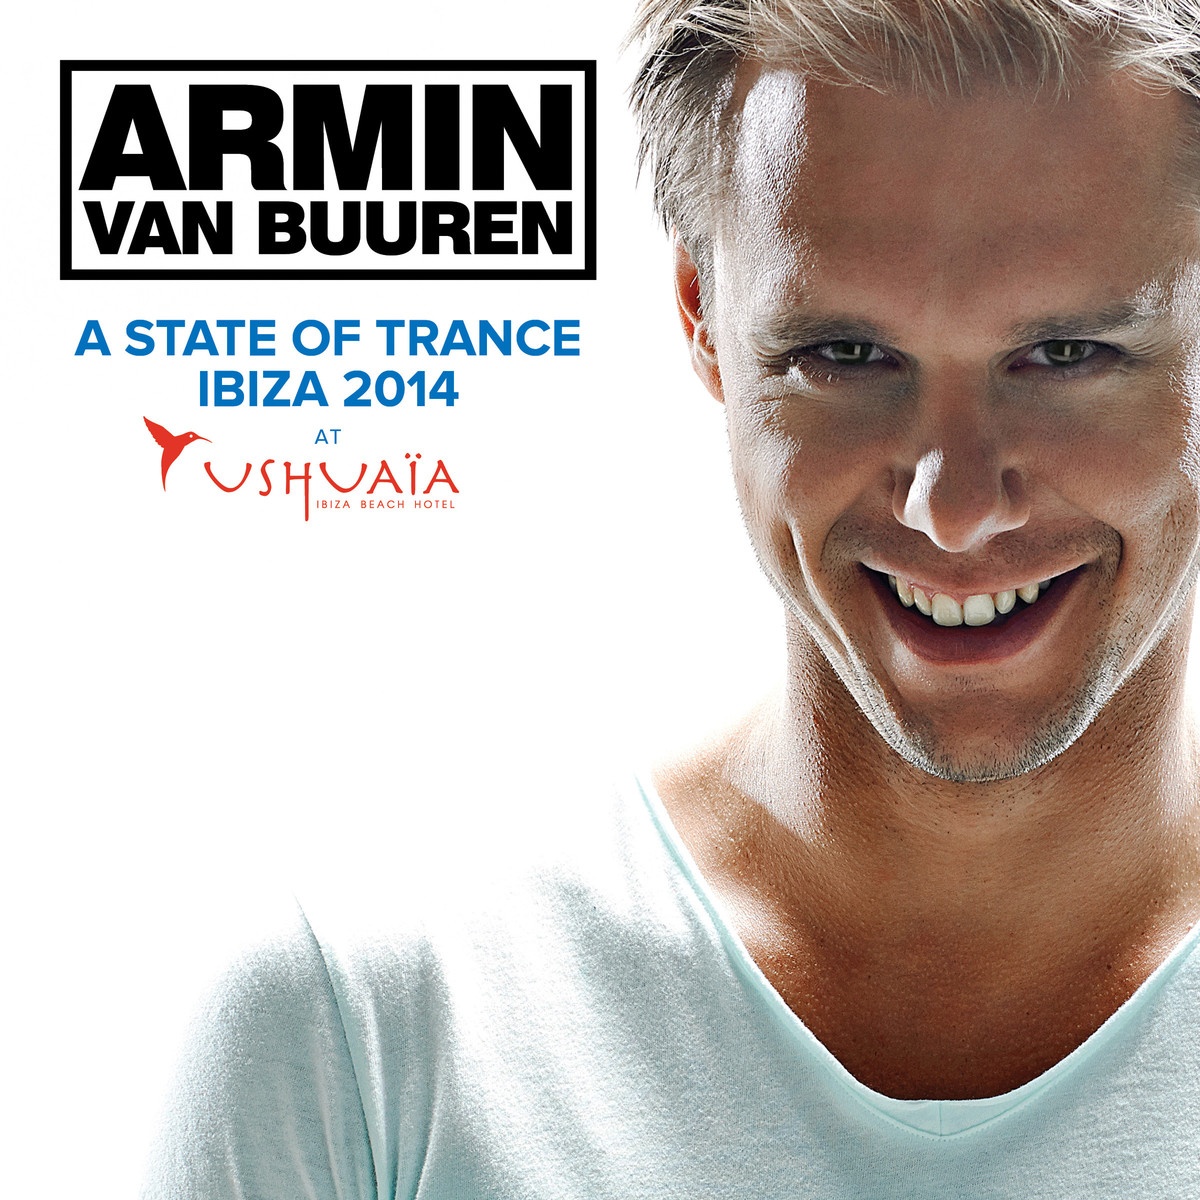 A State of Trance At UshuaO a, Ibiza 2014 Full Continuous Mix, Pt. 2